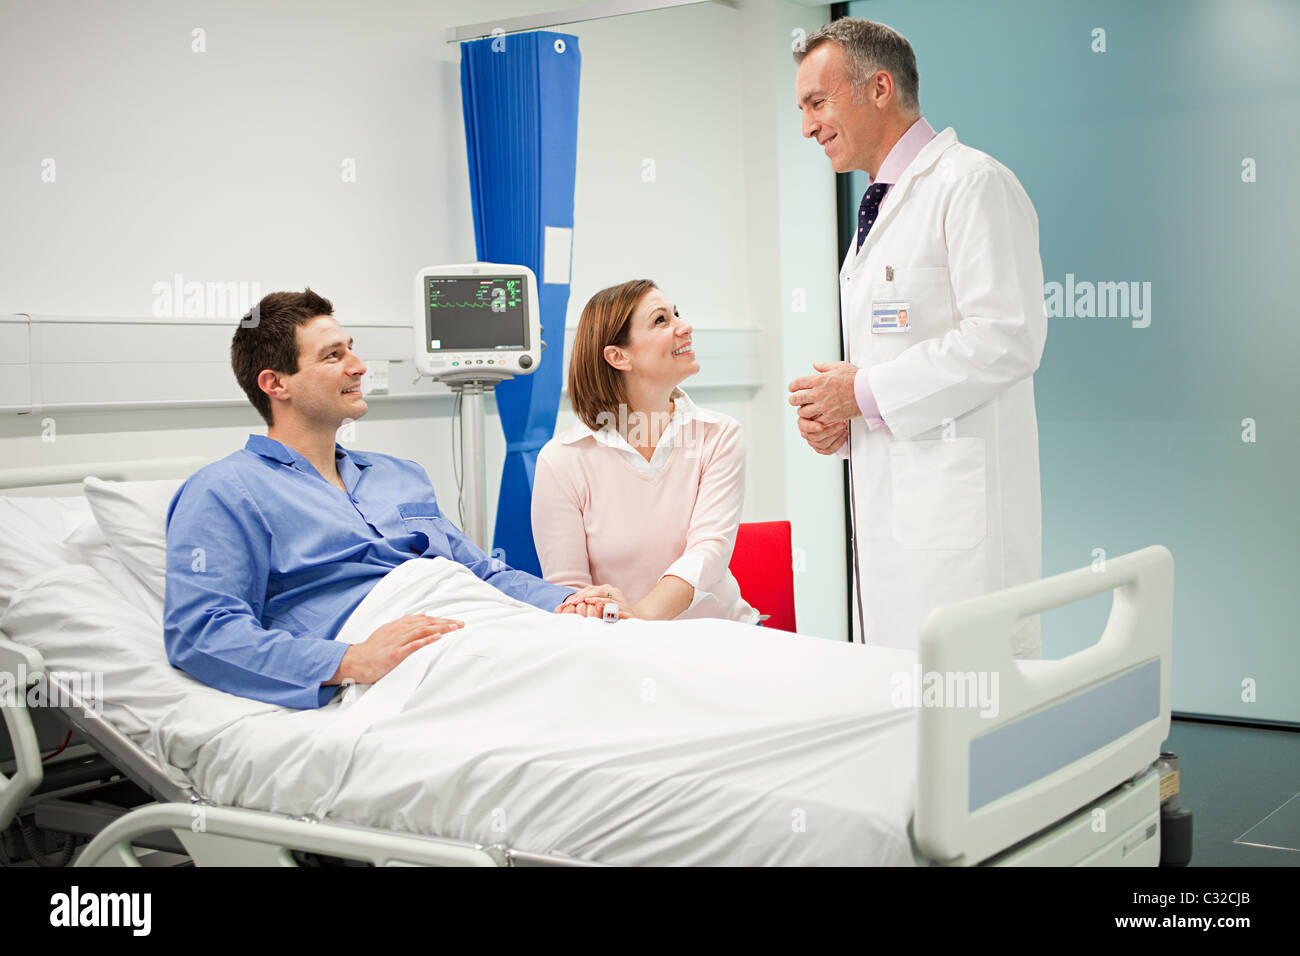 Wife visiting husband in hospital, talking to doctor Stock Photo